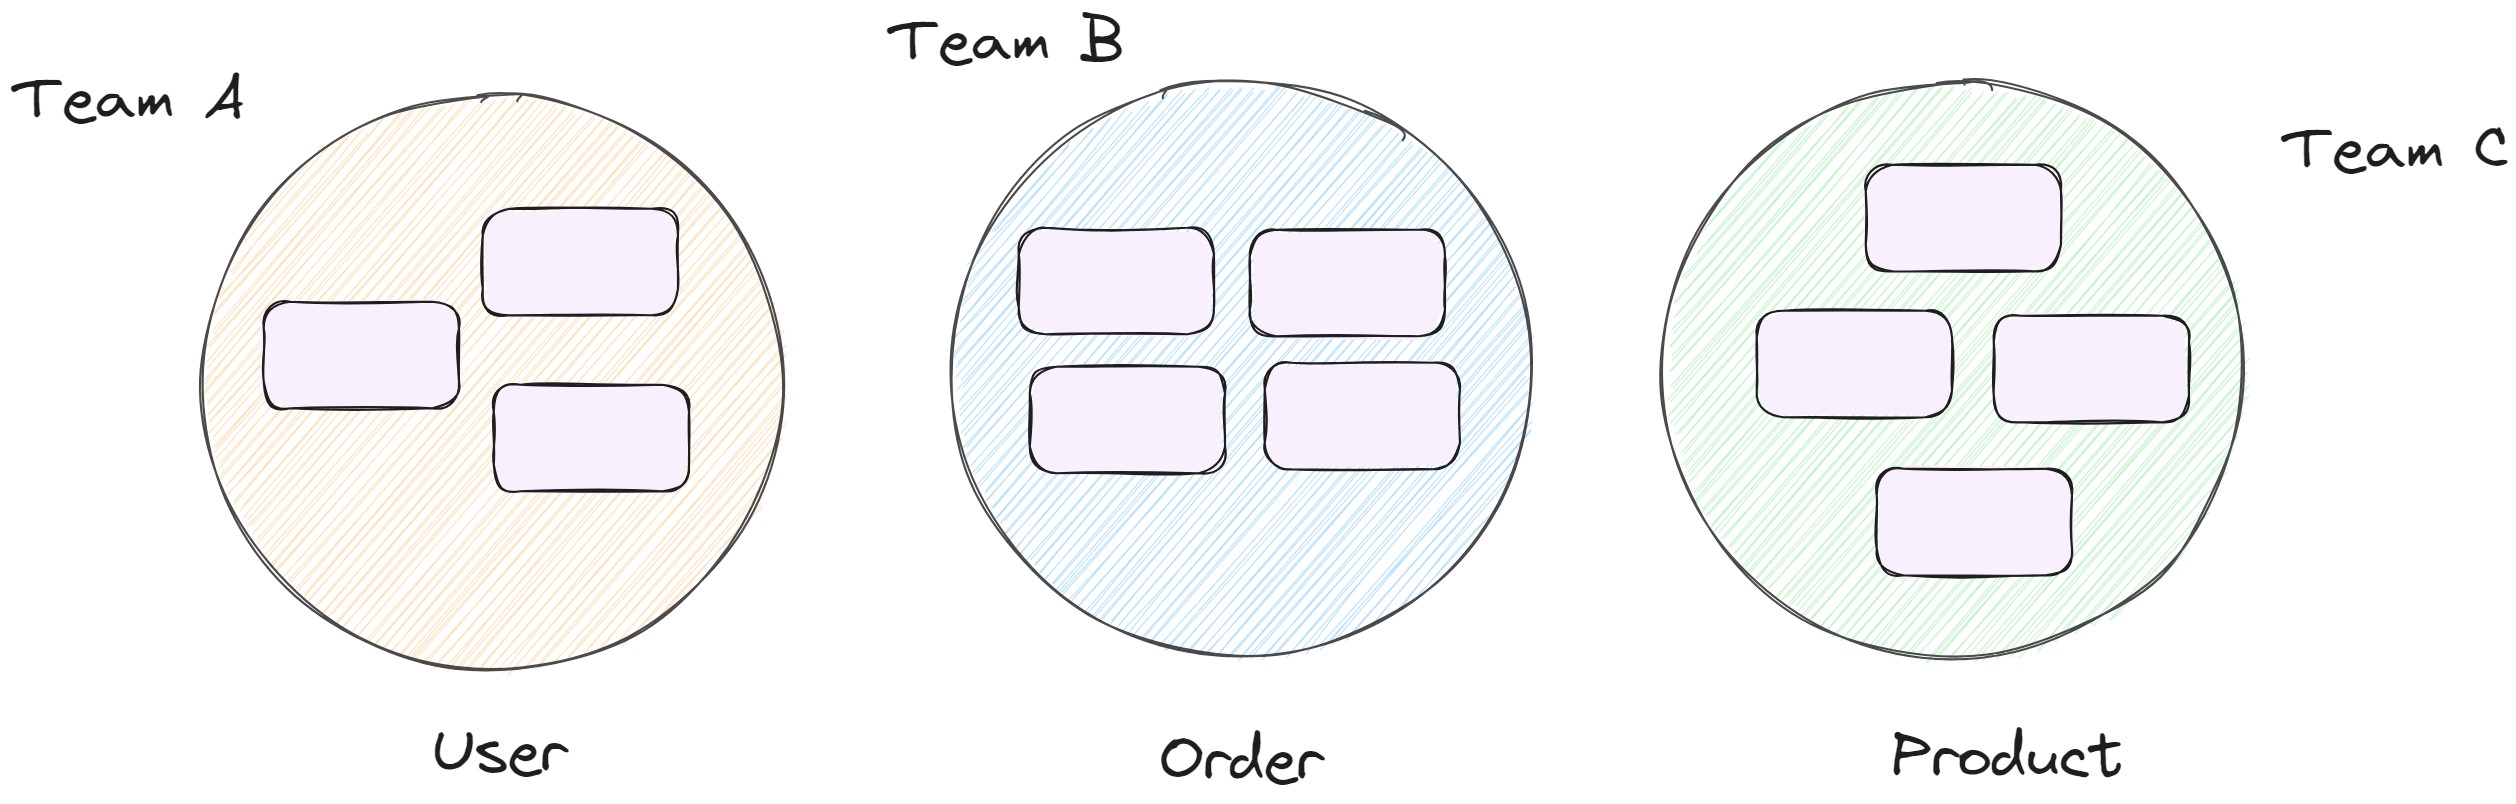 Diagram of Team organization with microservices.